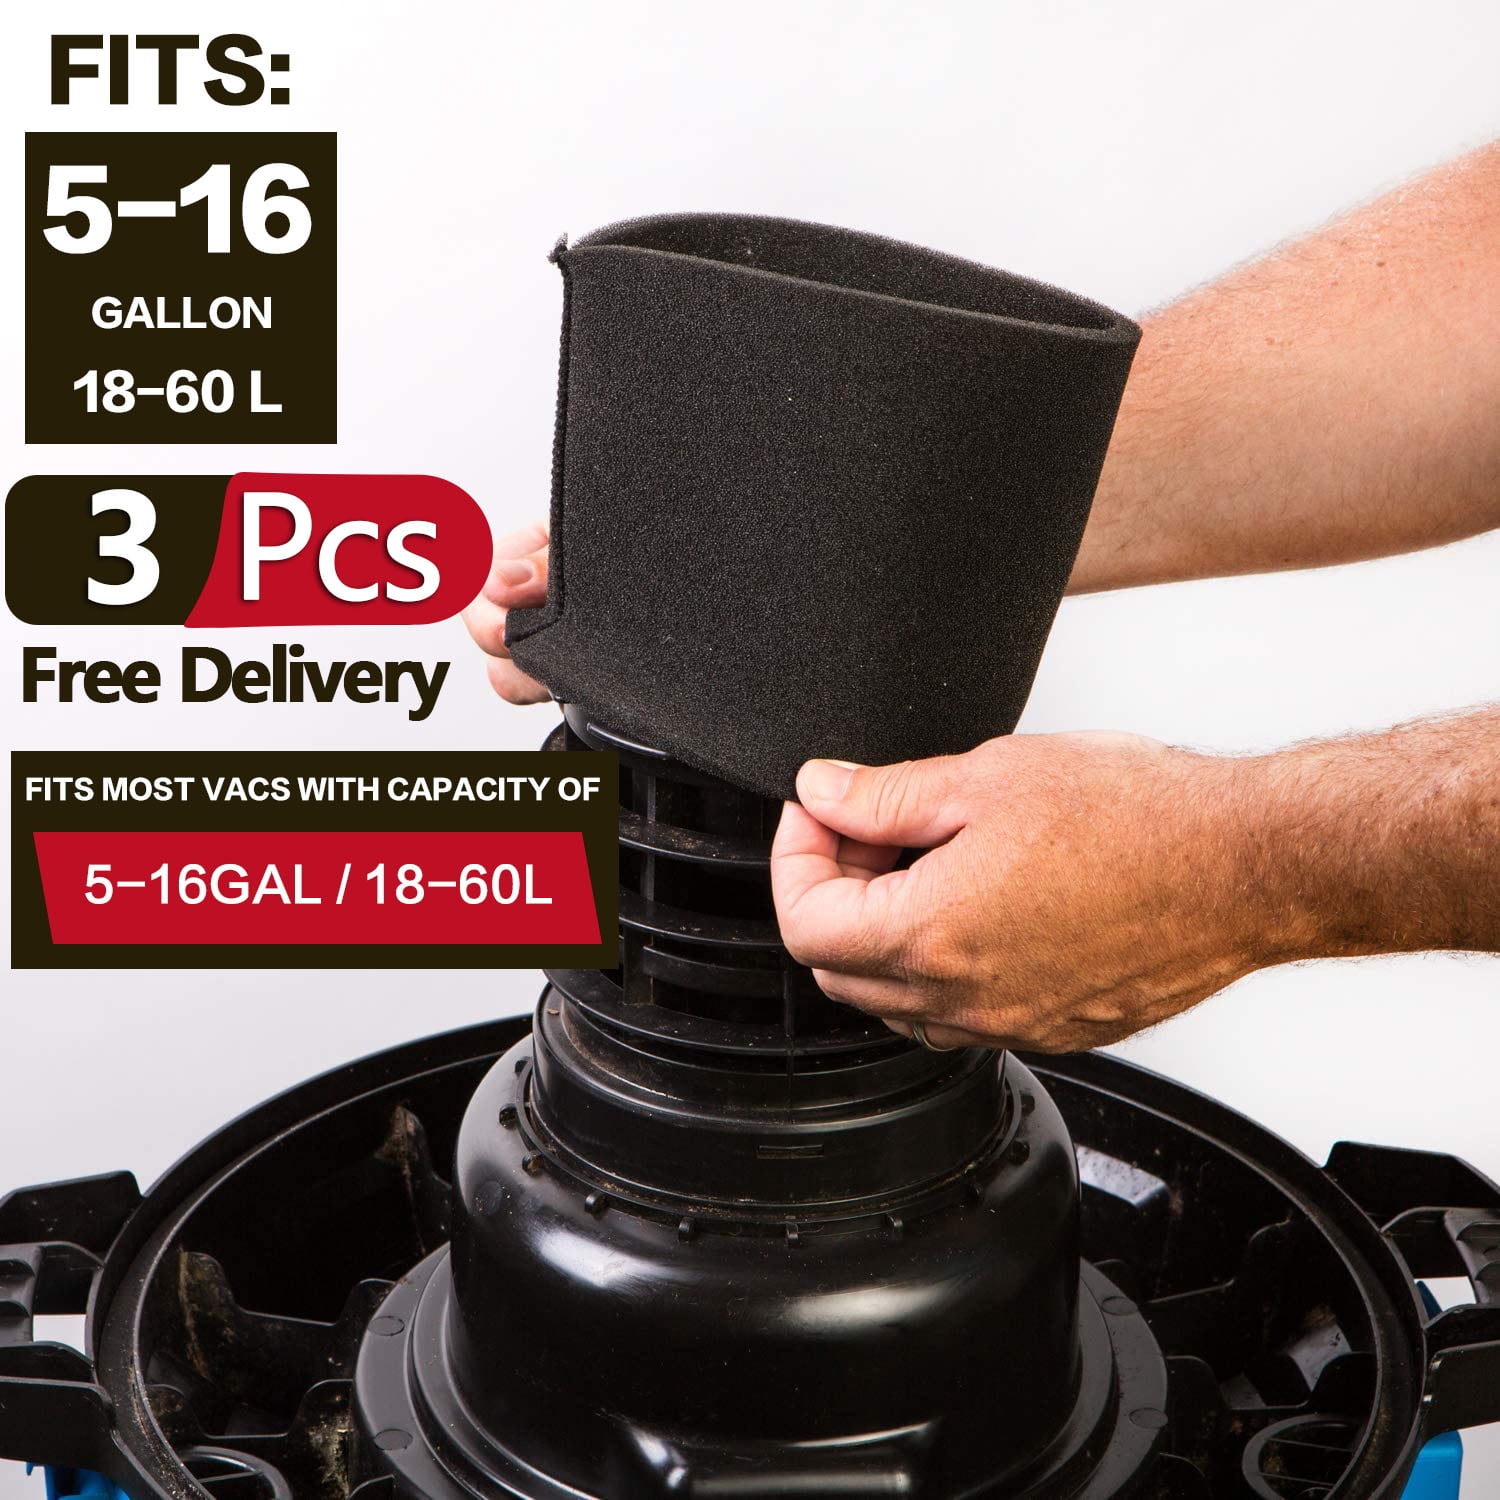 craftsman wet dry vac filters, amazing disposition off 62% 